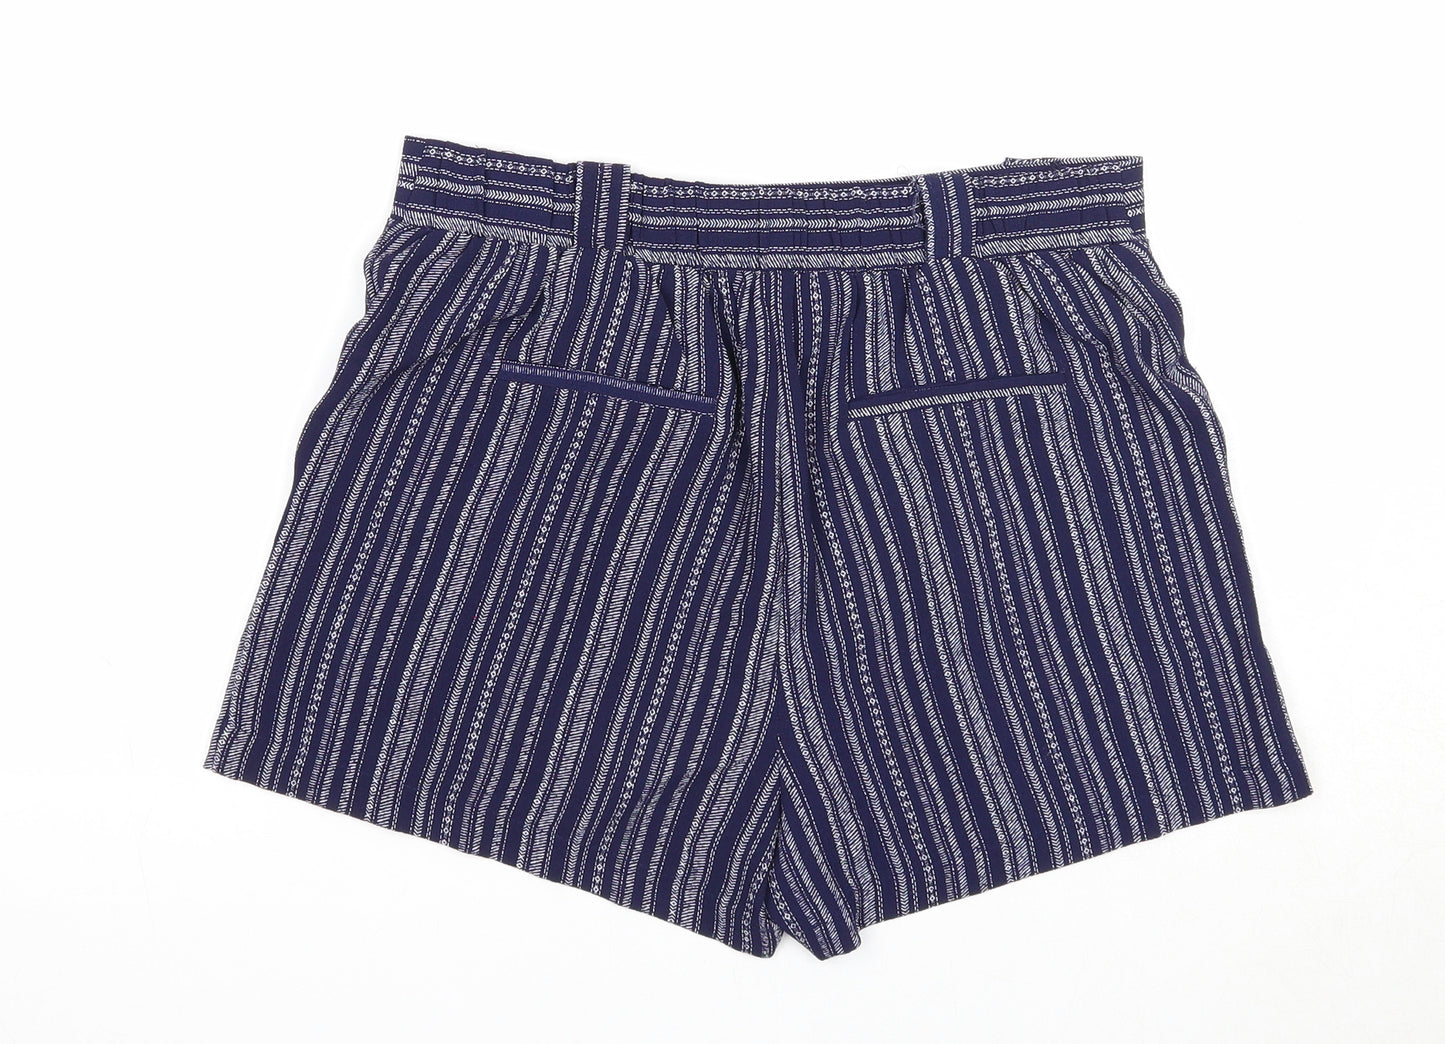 New Look Womens Blue Striped Polyester Basic Shorts Size 8 Regular Pull On